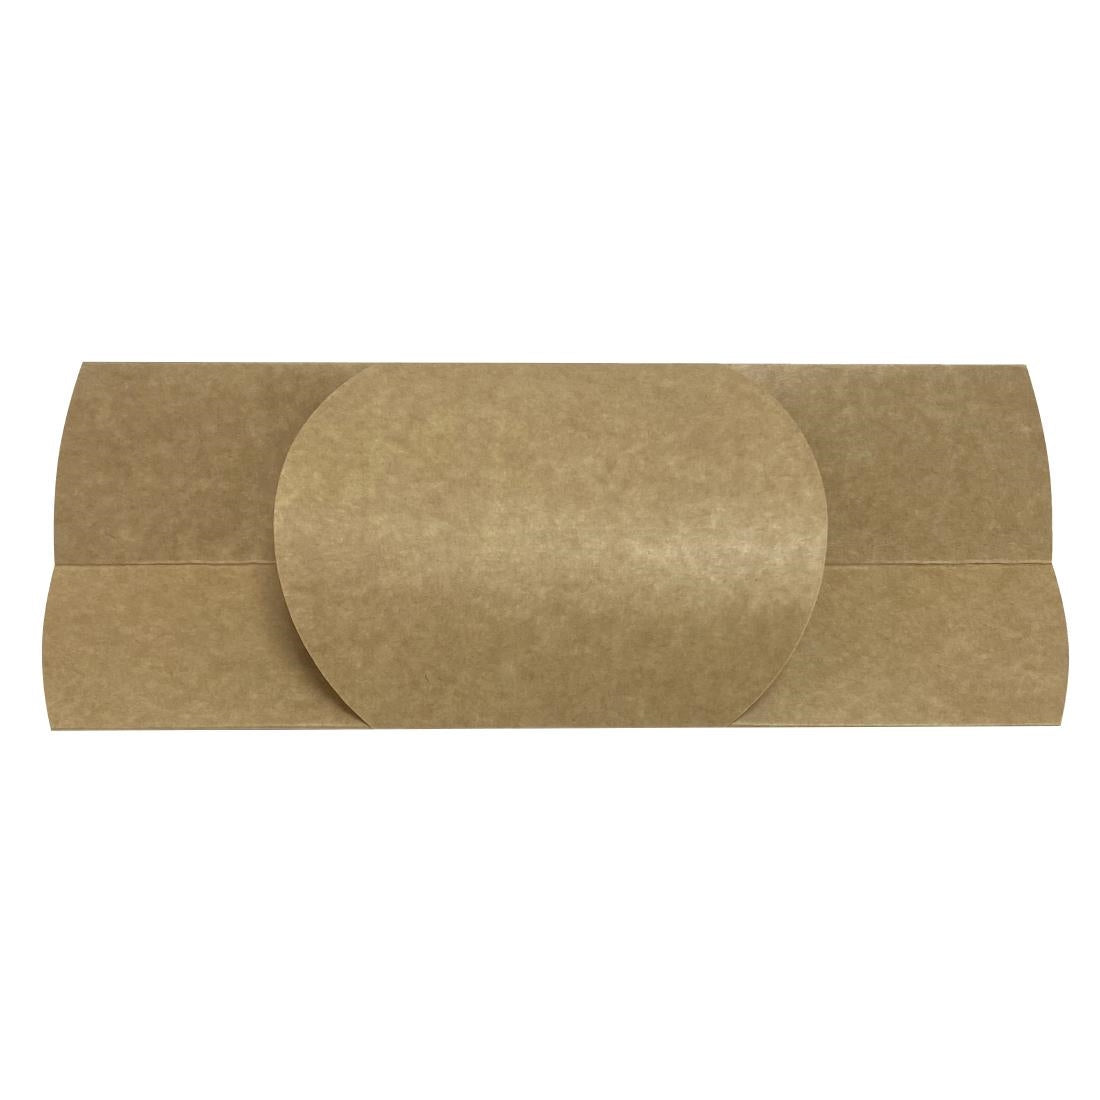 FT654 Fiesta Recyclable Tortilla Wrap Sleeve (Pack of 1000) JD Catering Equipment Solutions Ltd